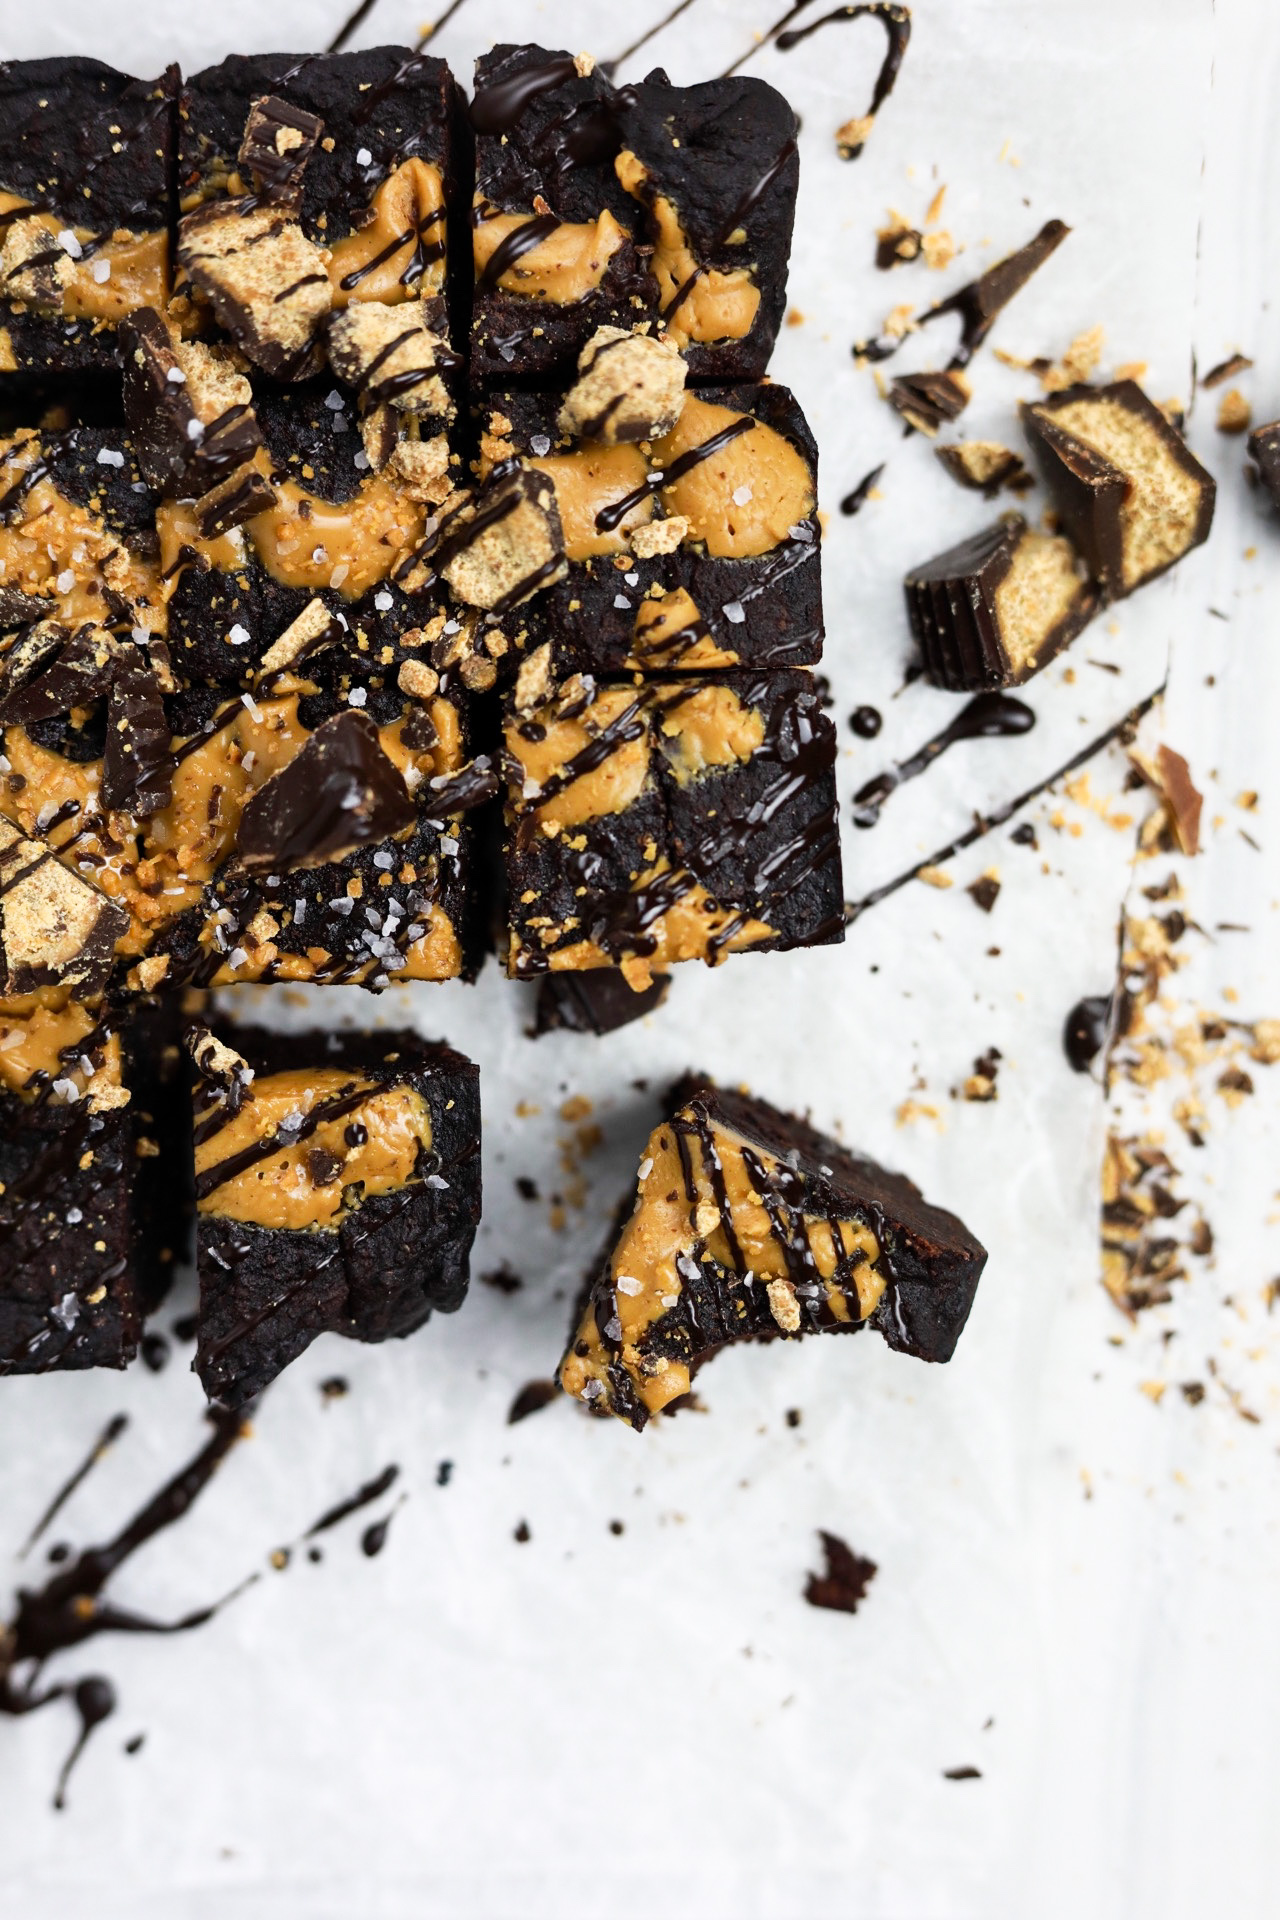 Chocolate brownies swirled with peanut butter and drizzled with chocolate.